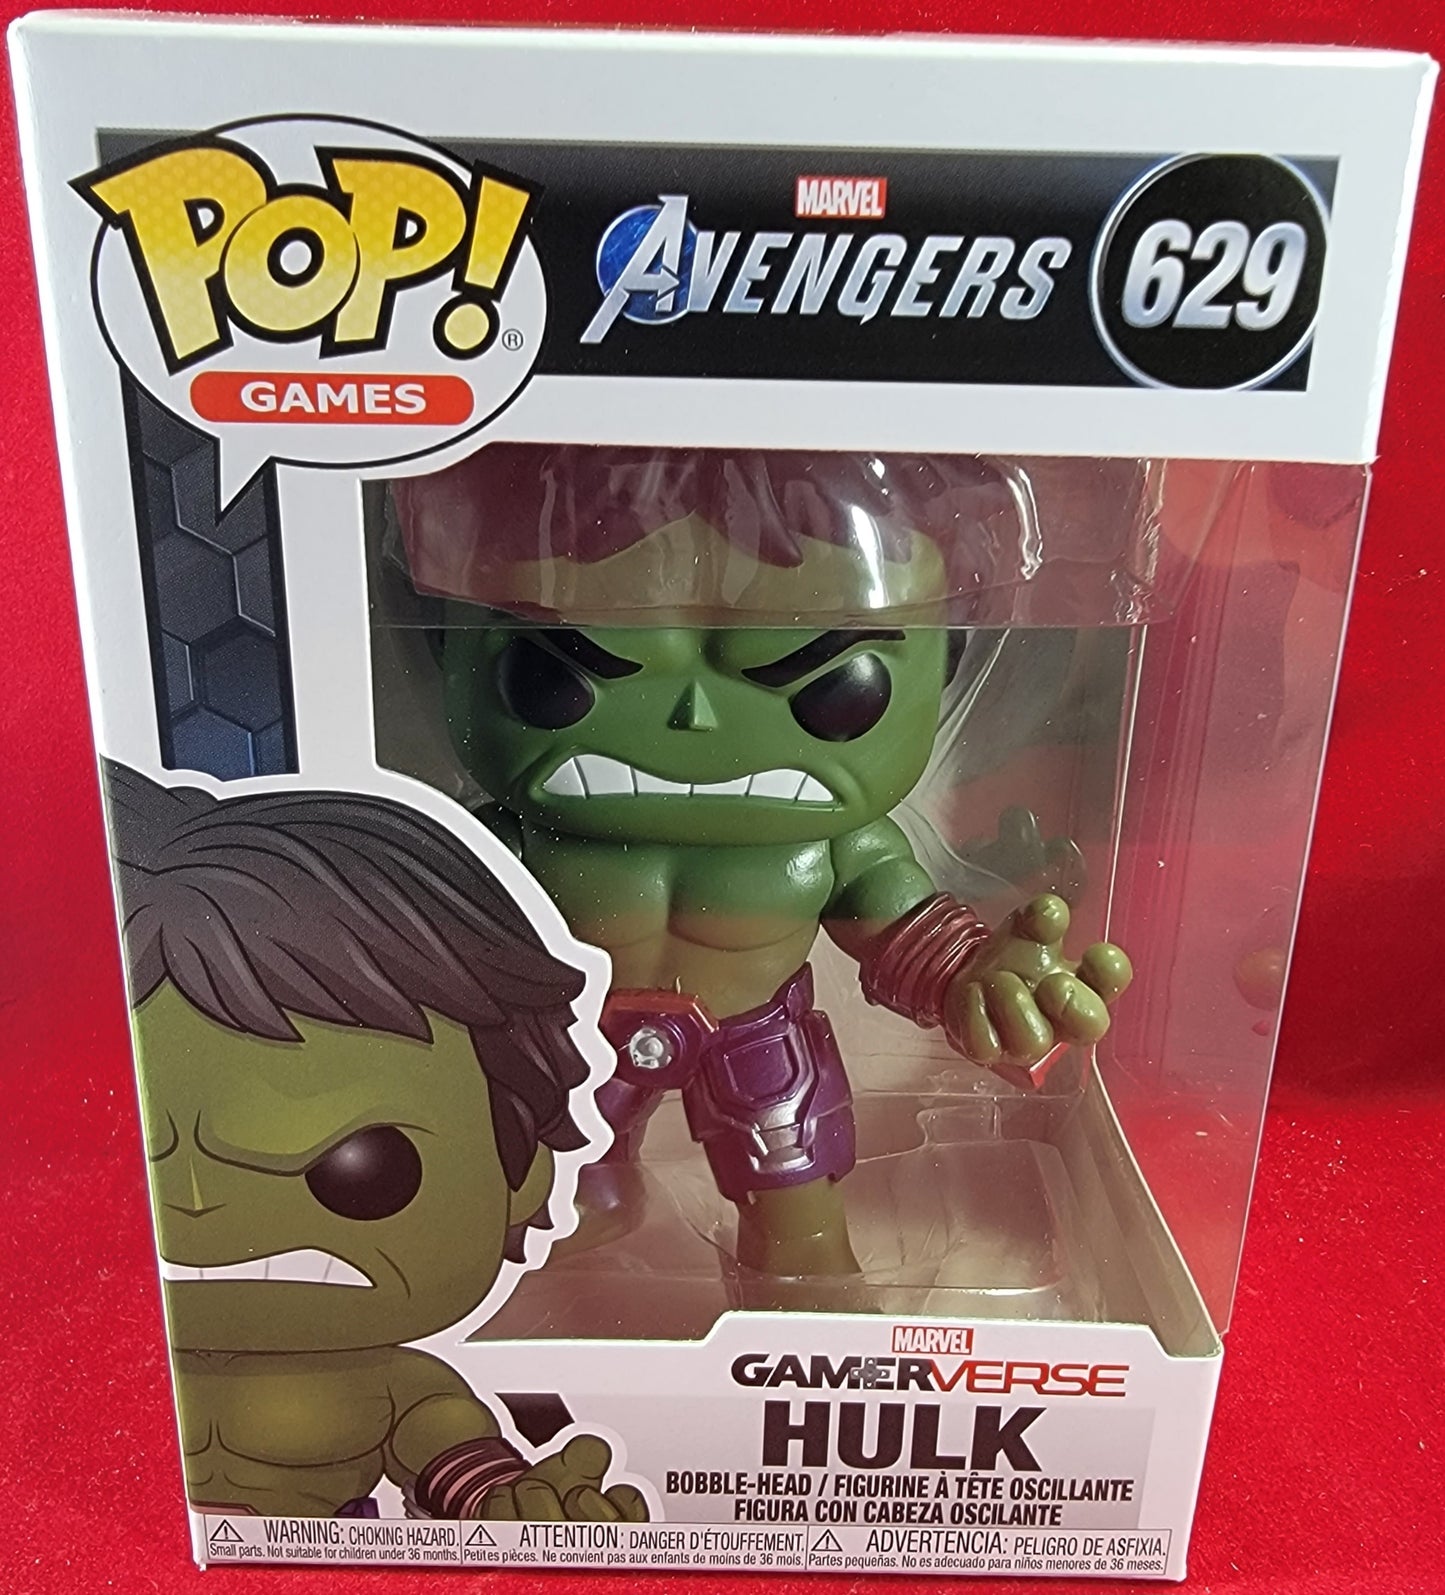 Hulk funko # 629 (nib)
brand new gamerverse marvel avengers hulk. pop has Hulk in metallic green. pop is in near perfect condition and will be shipped in a compatible pop protector.